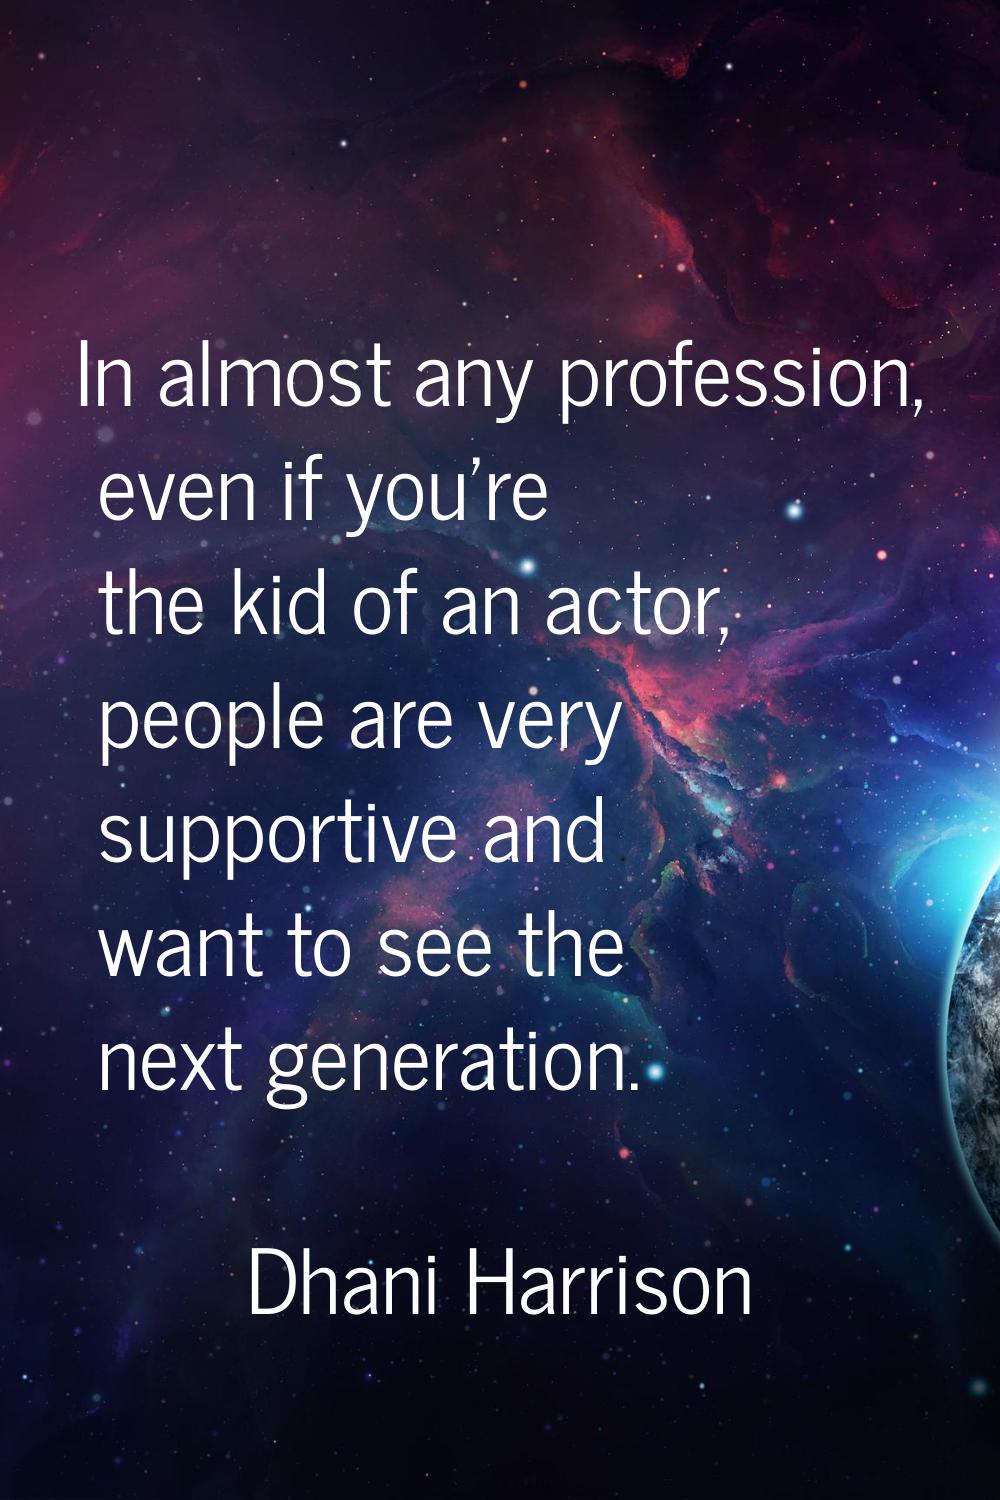 In almost any profession, even if you're the kid of an actor, people are very supportive and want t